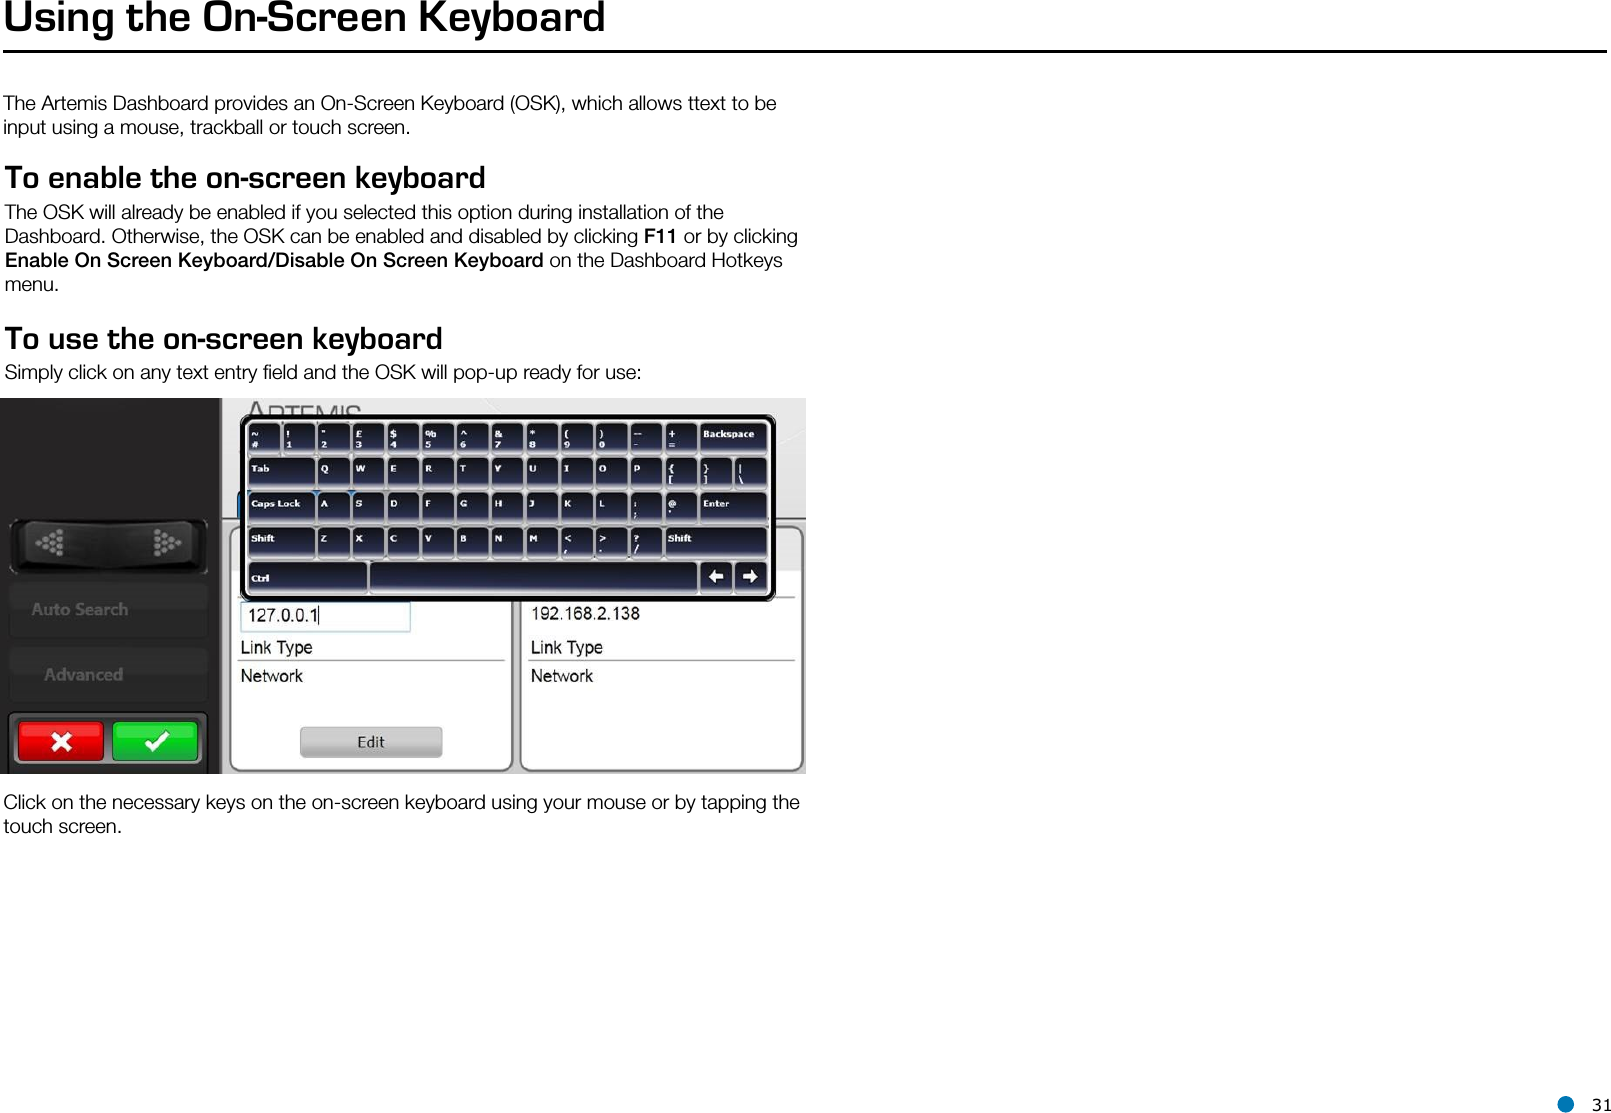 l 31Using the On-Screen KeyboardThe Artemis Dashboard provides an On-Screen Keyboard (OSK), which allows ttext to be input using a mouse, trackball or touch screen.To enable the on-screen keyboard The OSK will already be enabled if you selected this option during installation of the Dashboard. Otherwise, the OSK can be enabled and disabled by clicking F11 or by clicking Enable On Screen Keyboard/Disable On Screen Keyboard on the Dashboard Hotkeys menu.To use the on-screen keyboard Simply click on any text entry ﬁeld and the OSK will pop-up ready for use:Click on the necessary keys on the on-screen keyboard using your mouse or by tapping the touch screen.Hotkey Buttons